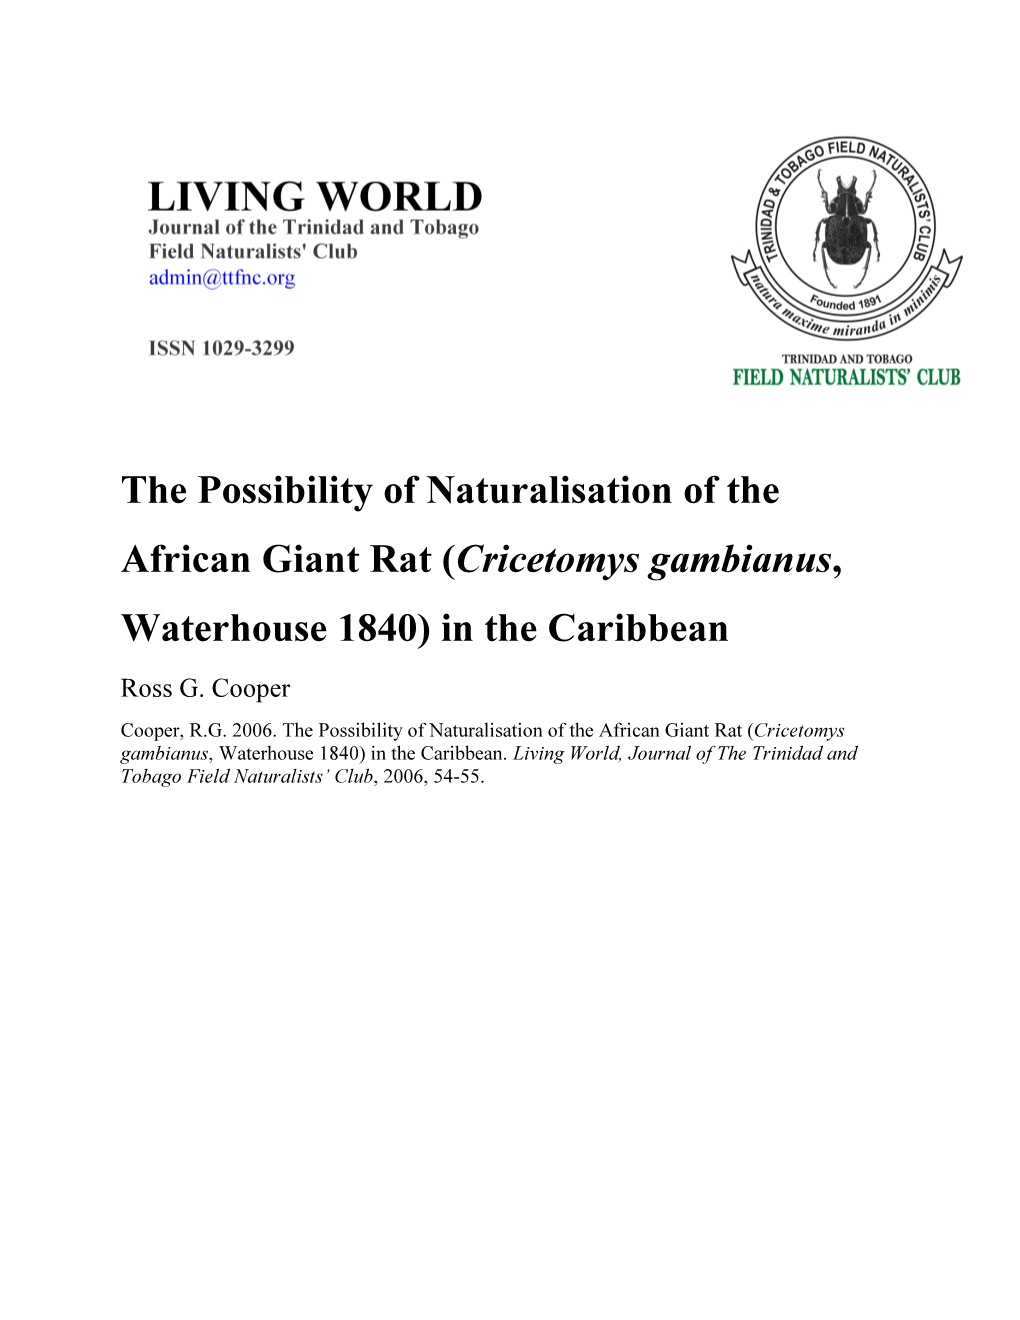 The Possibility of Naturalisation of the African Giant Rat (Cricetomys Gambianus, Waterhouse 1840) in the Caribbean